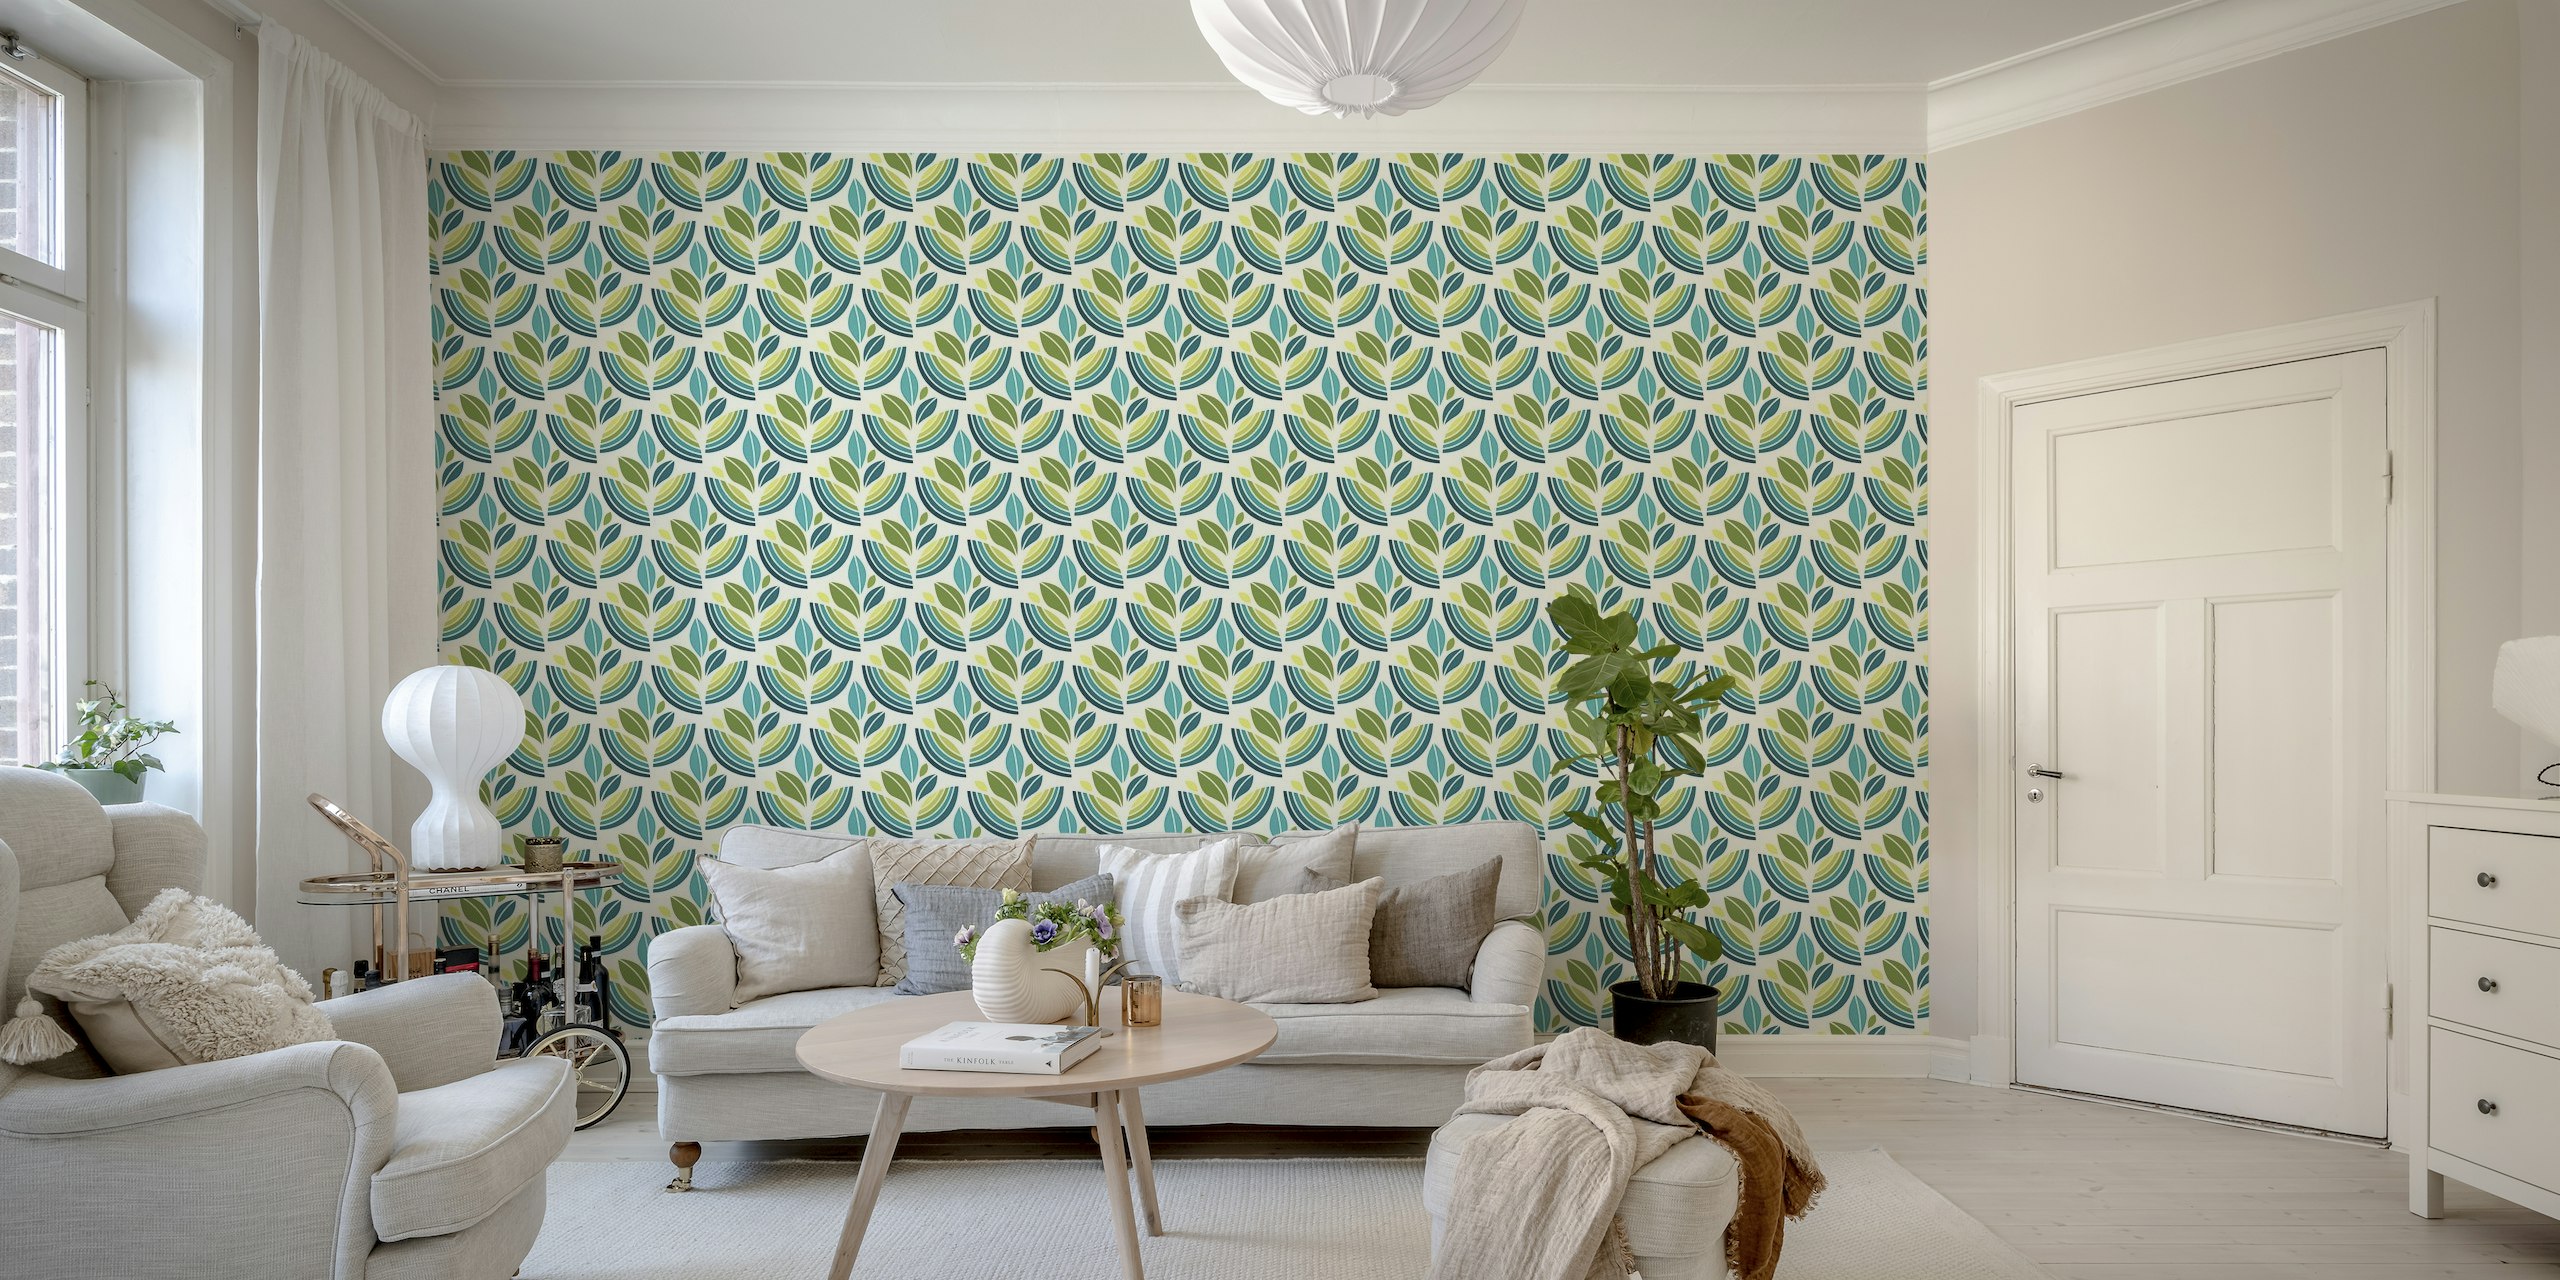 Bunch of Retro Flowers in Green and Turquise wallpaper